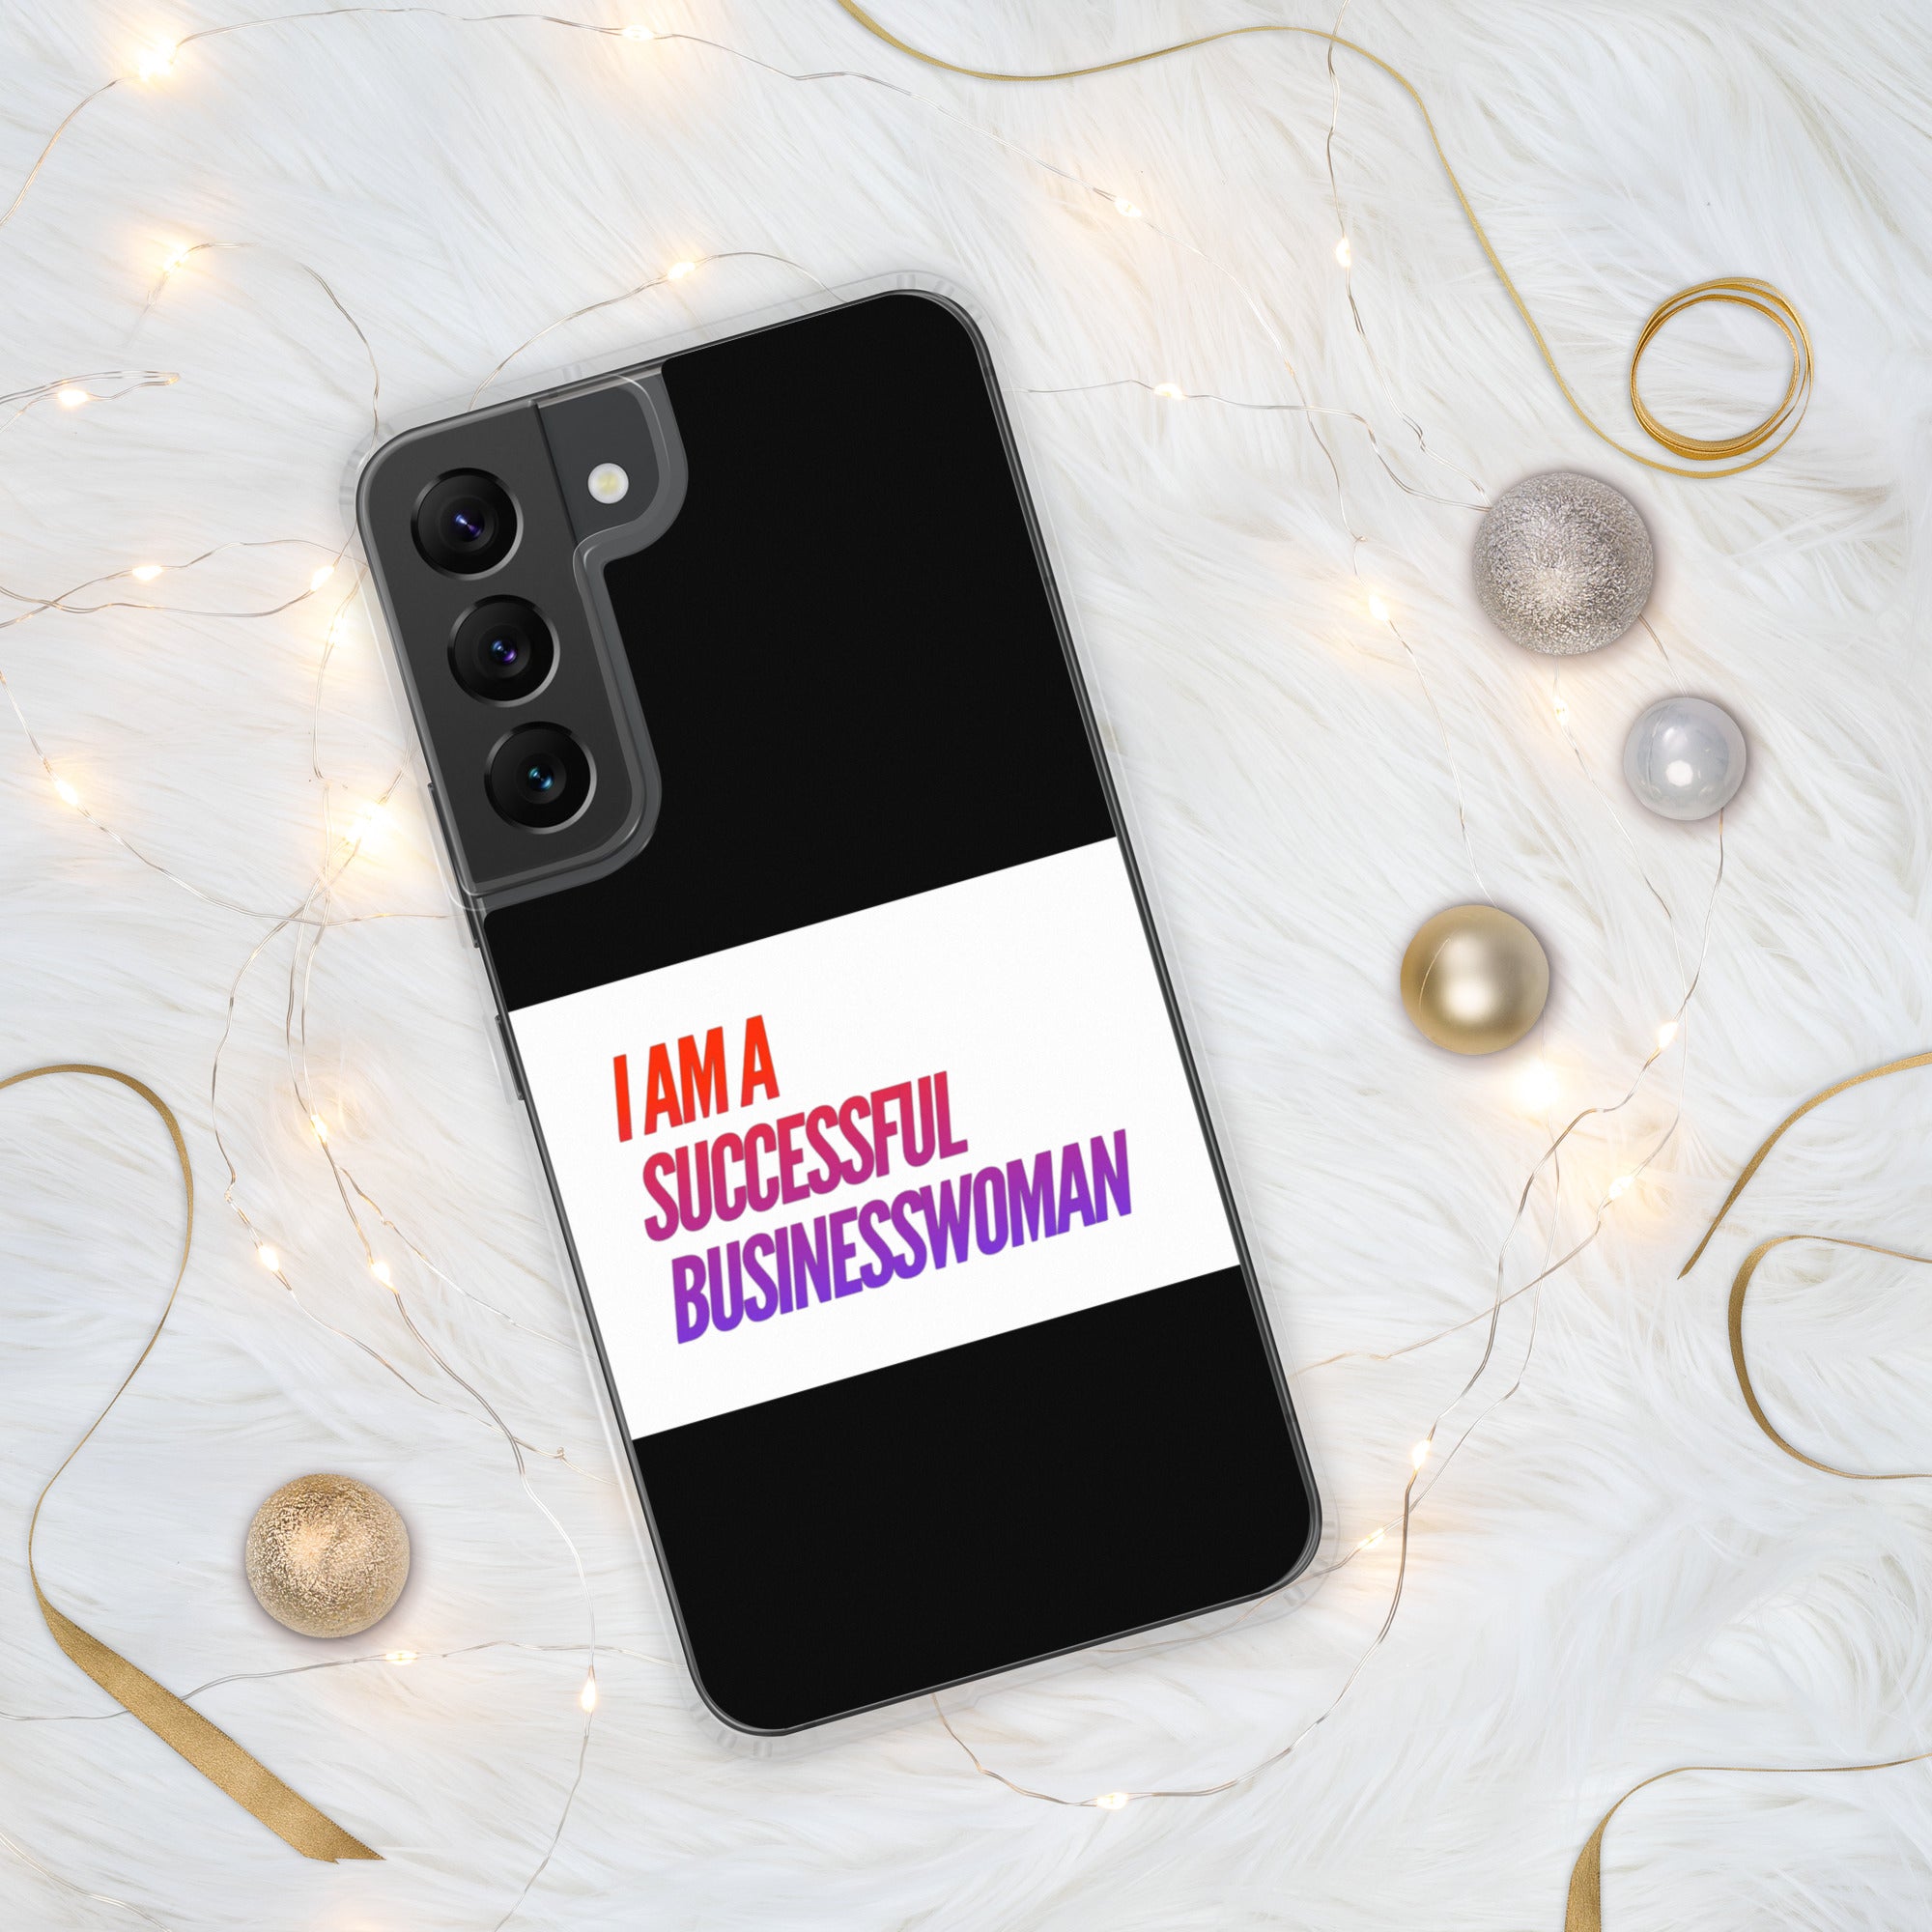 GloWell Designs - Samsung Case - Affirmation Quote - I Am a Successful Businesswoman - GloWell Designs